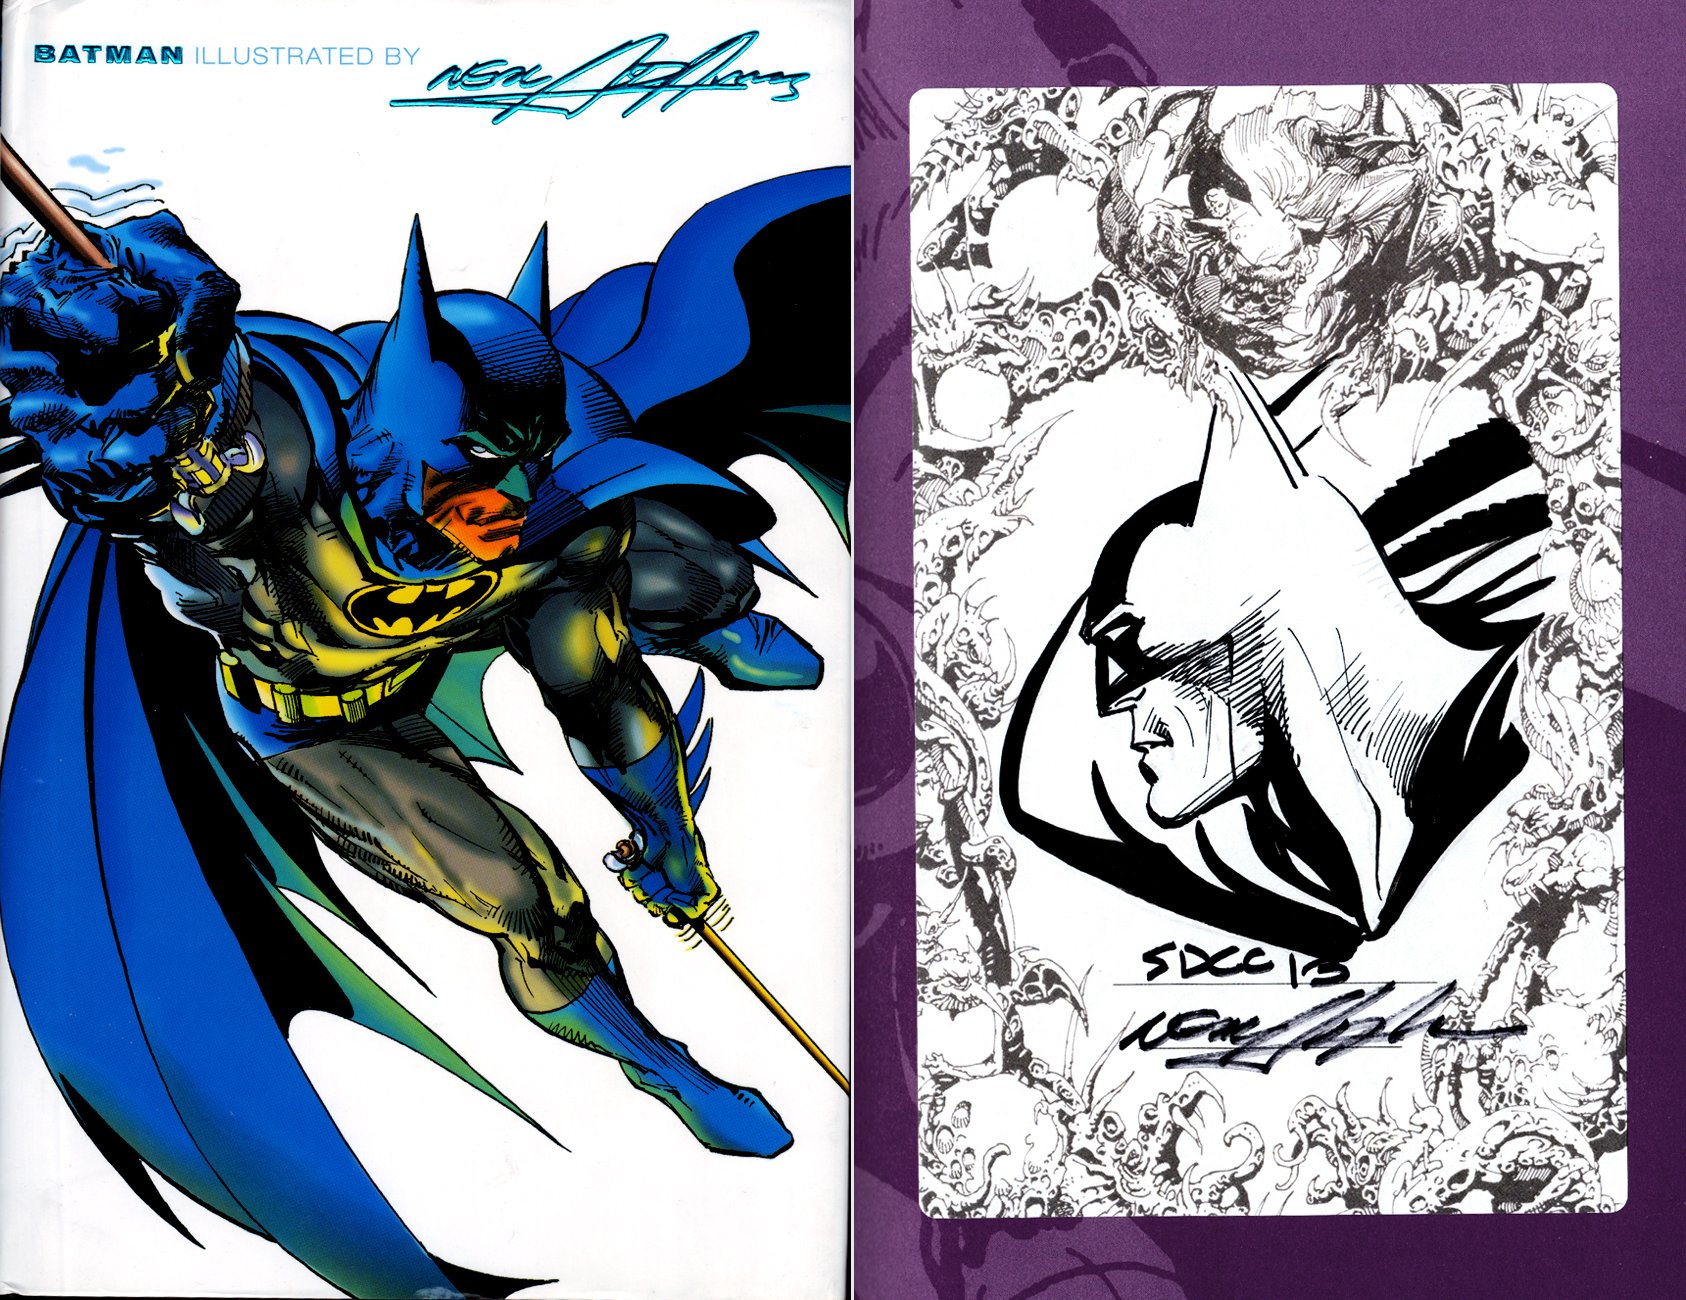 Batman Illustrated By Neal Adams Hardcover Book With Batman Pinup Comic Art  For Sale By Artist Neal Adams at 